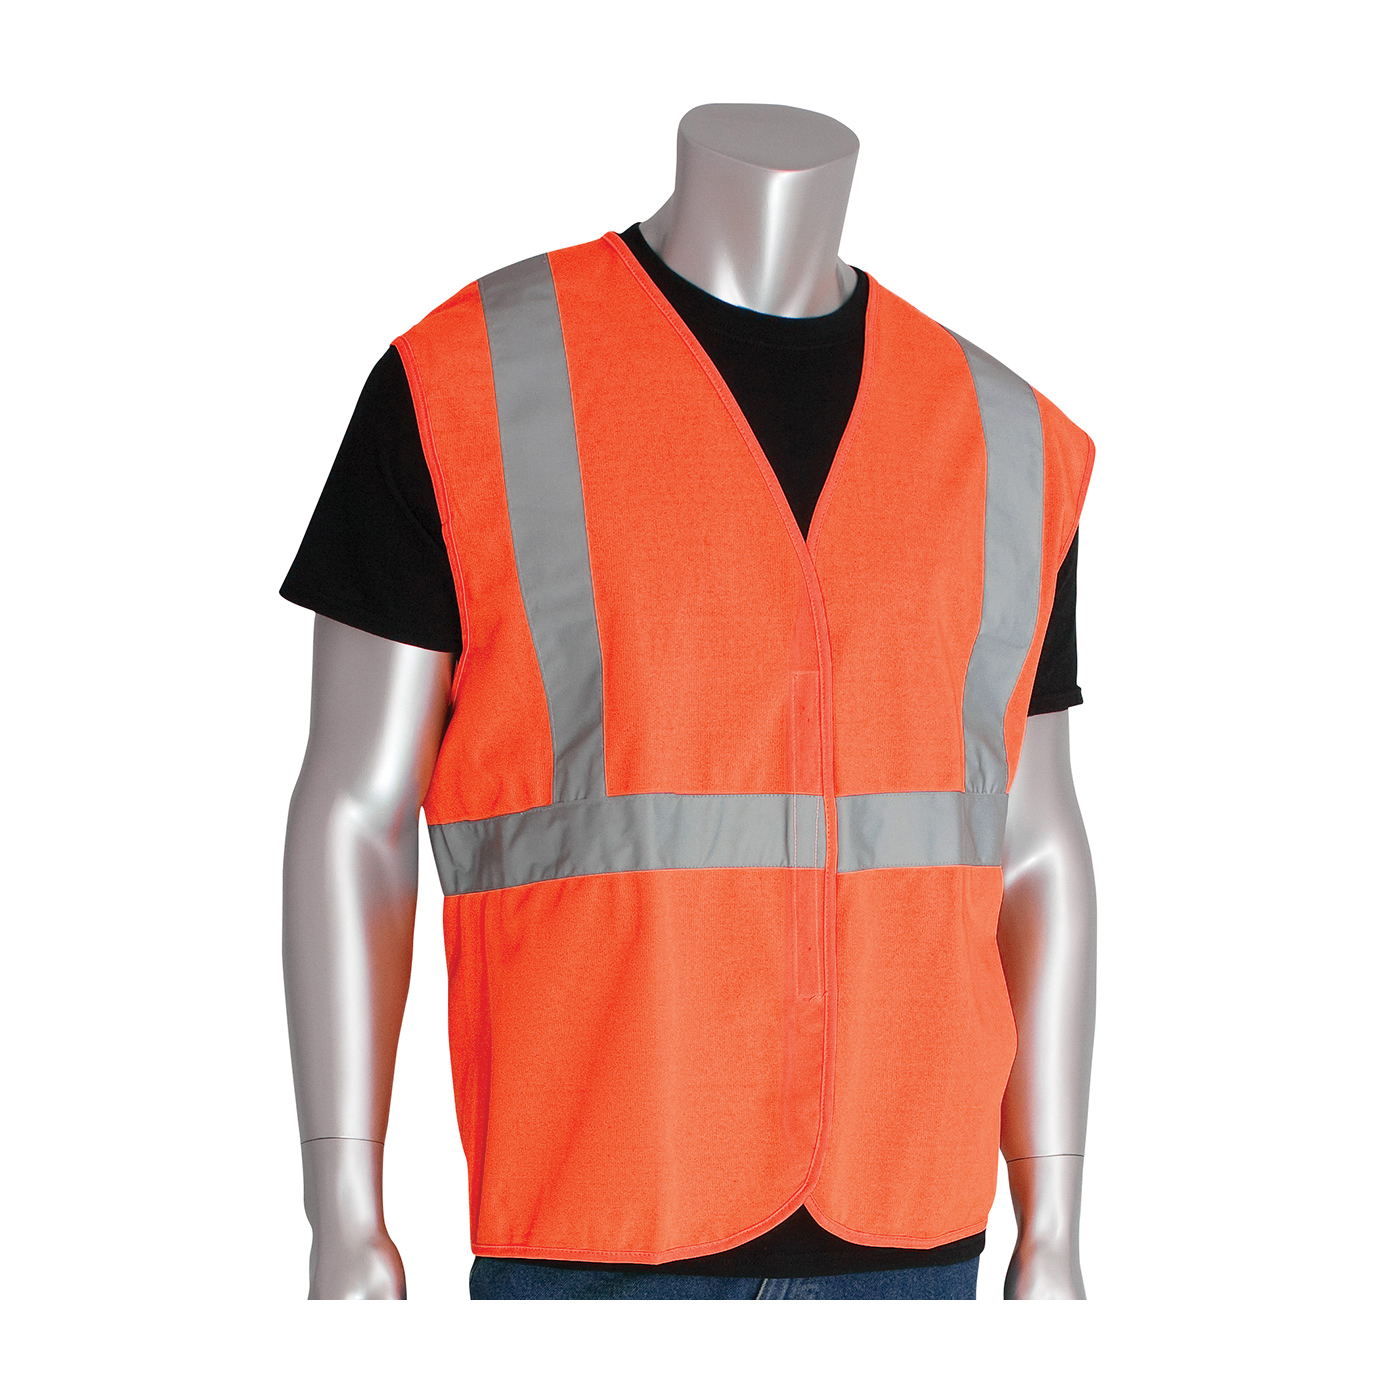 PIP® 302-WCENGOR-M Solid Vest, M, Hi-Viz Orange, Polyester, Hook and Loop Closure, ANSI Class: Class 2, Specifications Met: ANSI 107 Type R